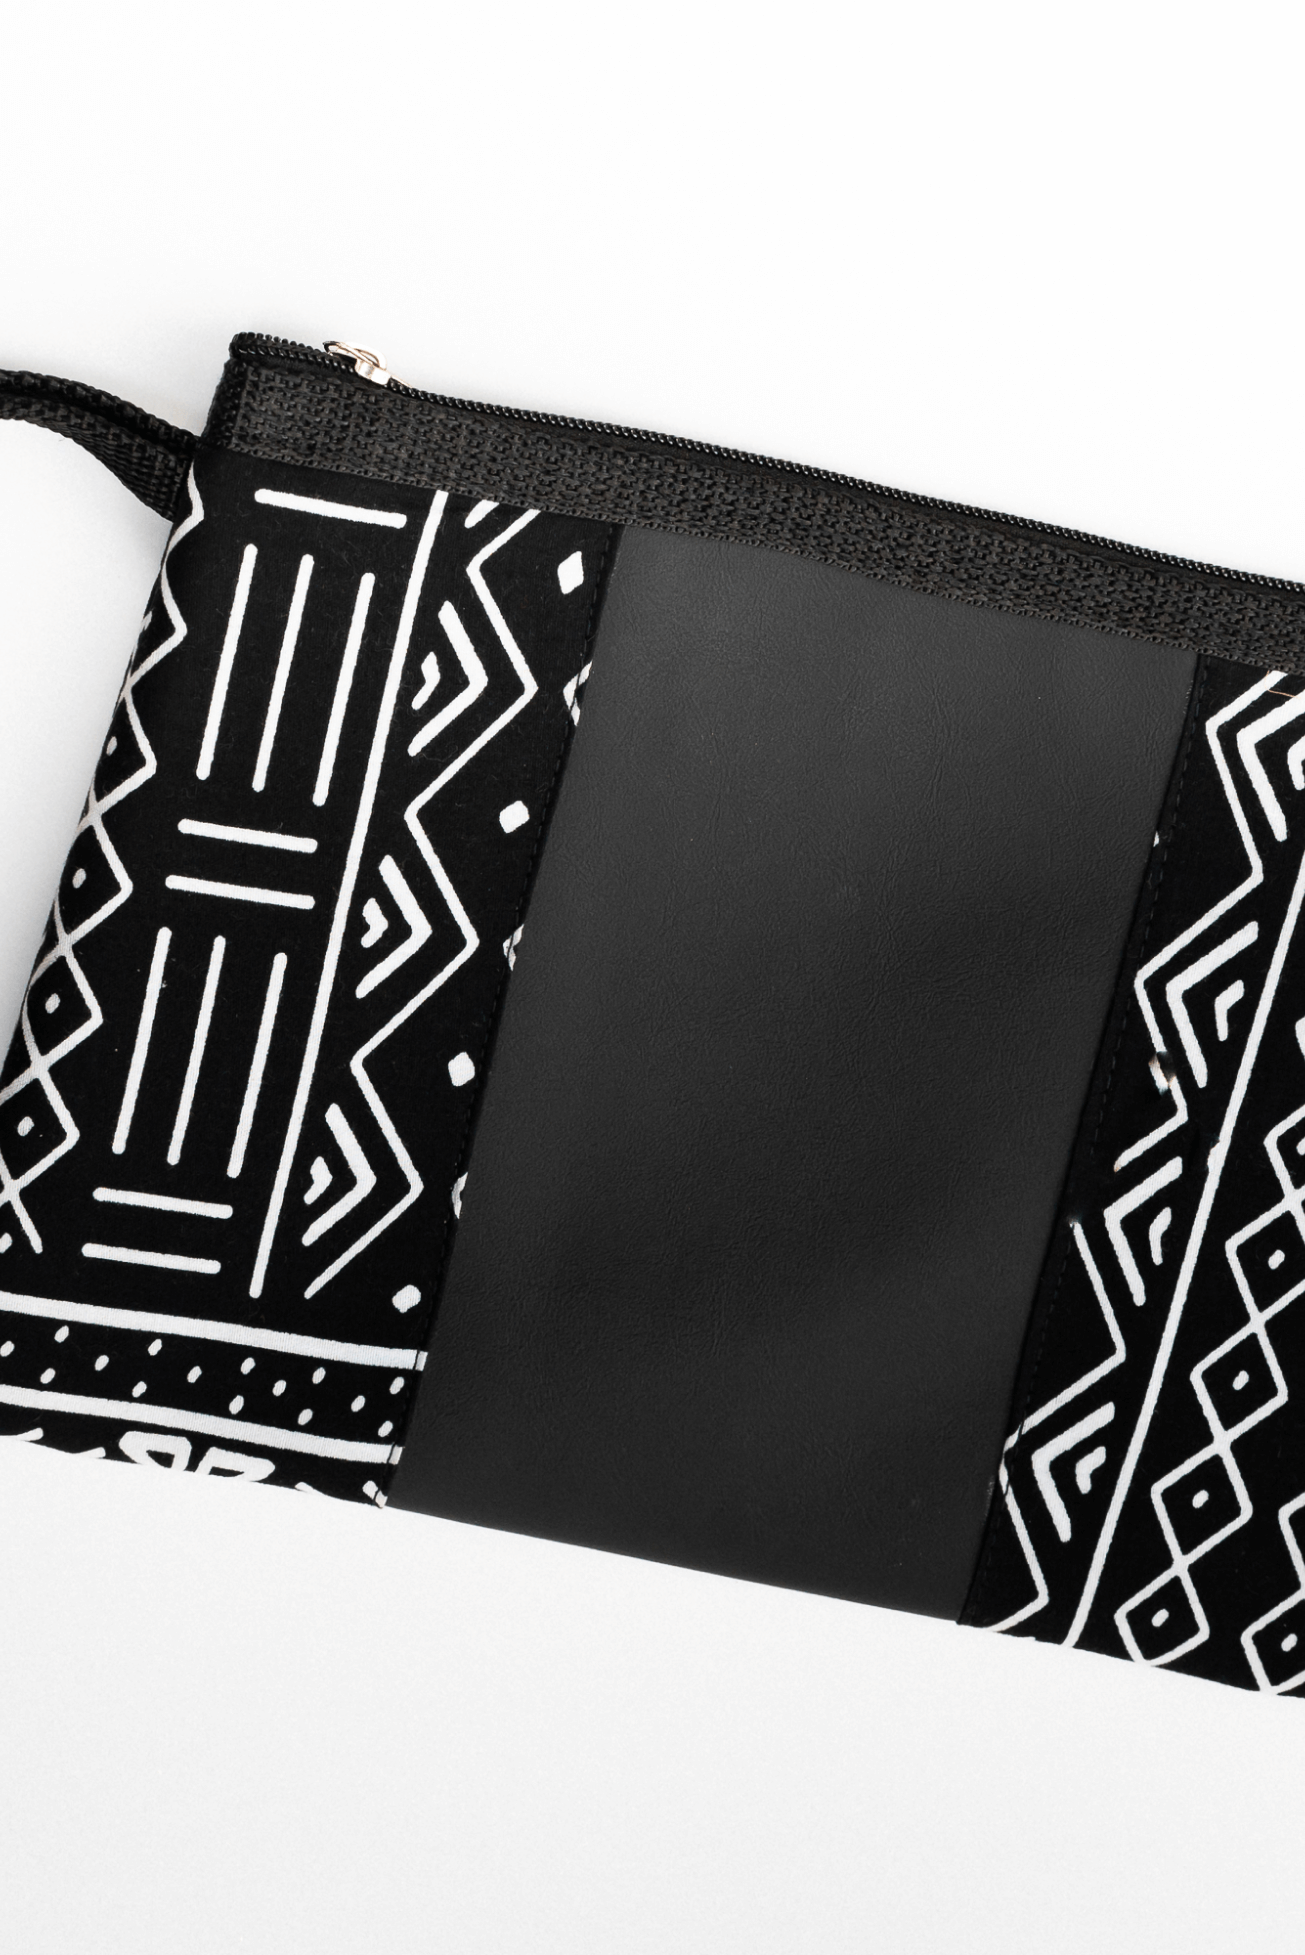 Shop Black and White Clutch Bag by ELISKIS on Arrai. Discover stylish, affordable clothing, jewelry, handbags and unique handmade pieces from top Kenyan & African fashion brands prioritising sustainability and quality craftsmanship.